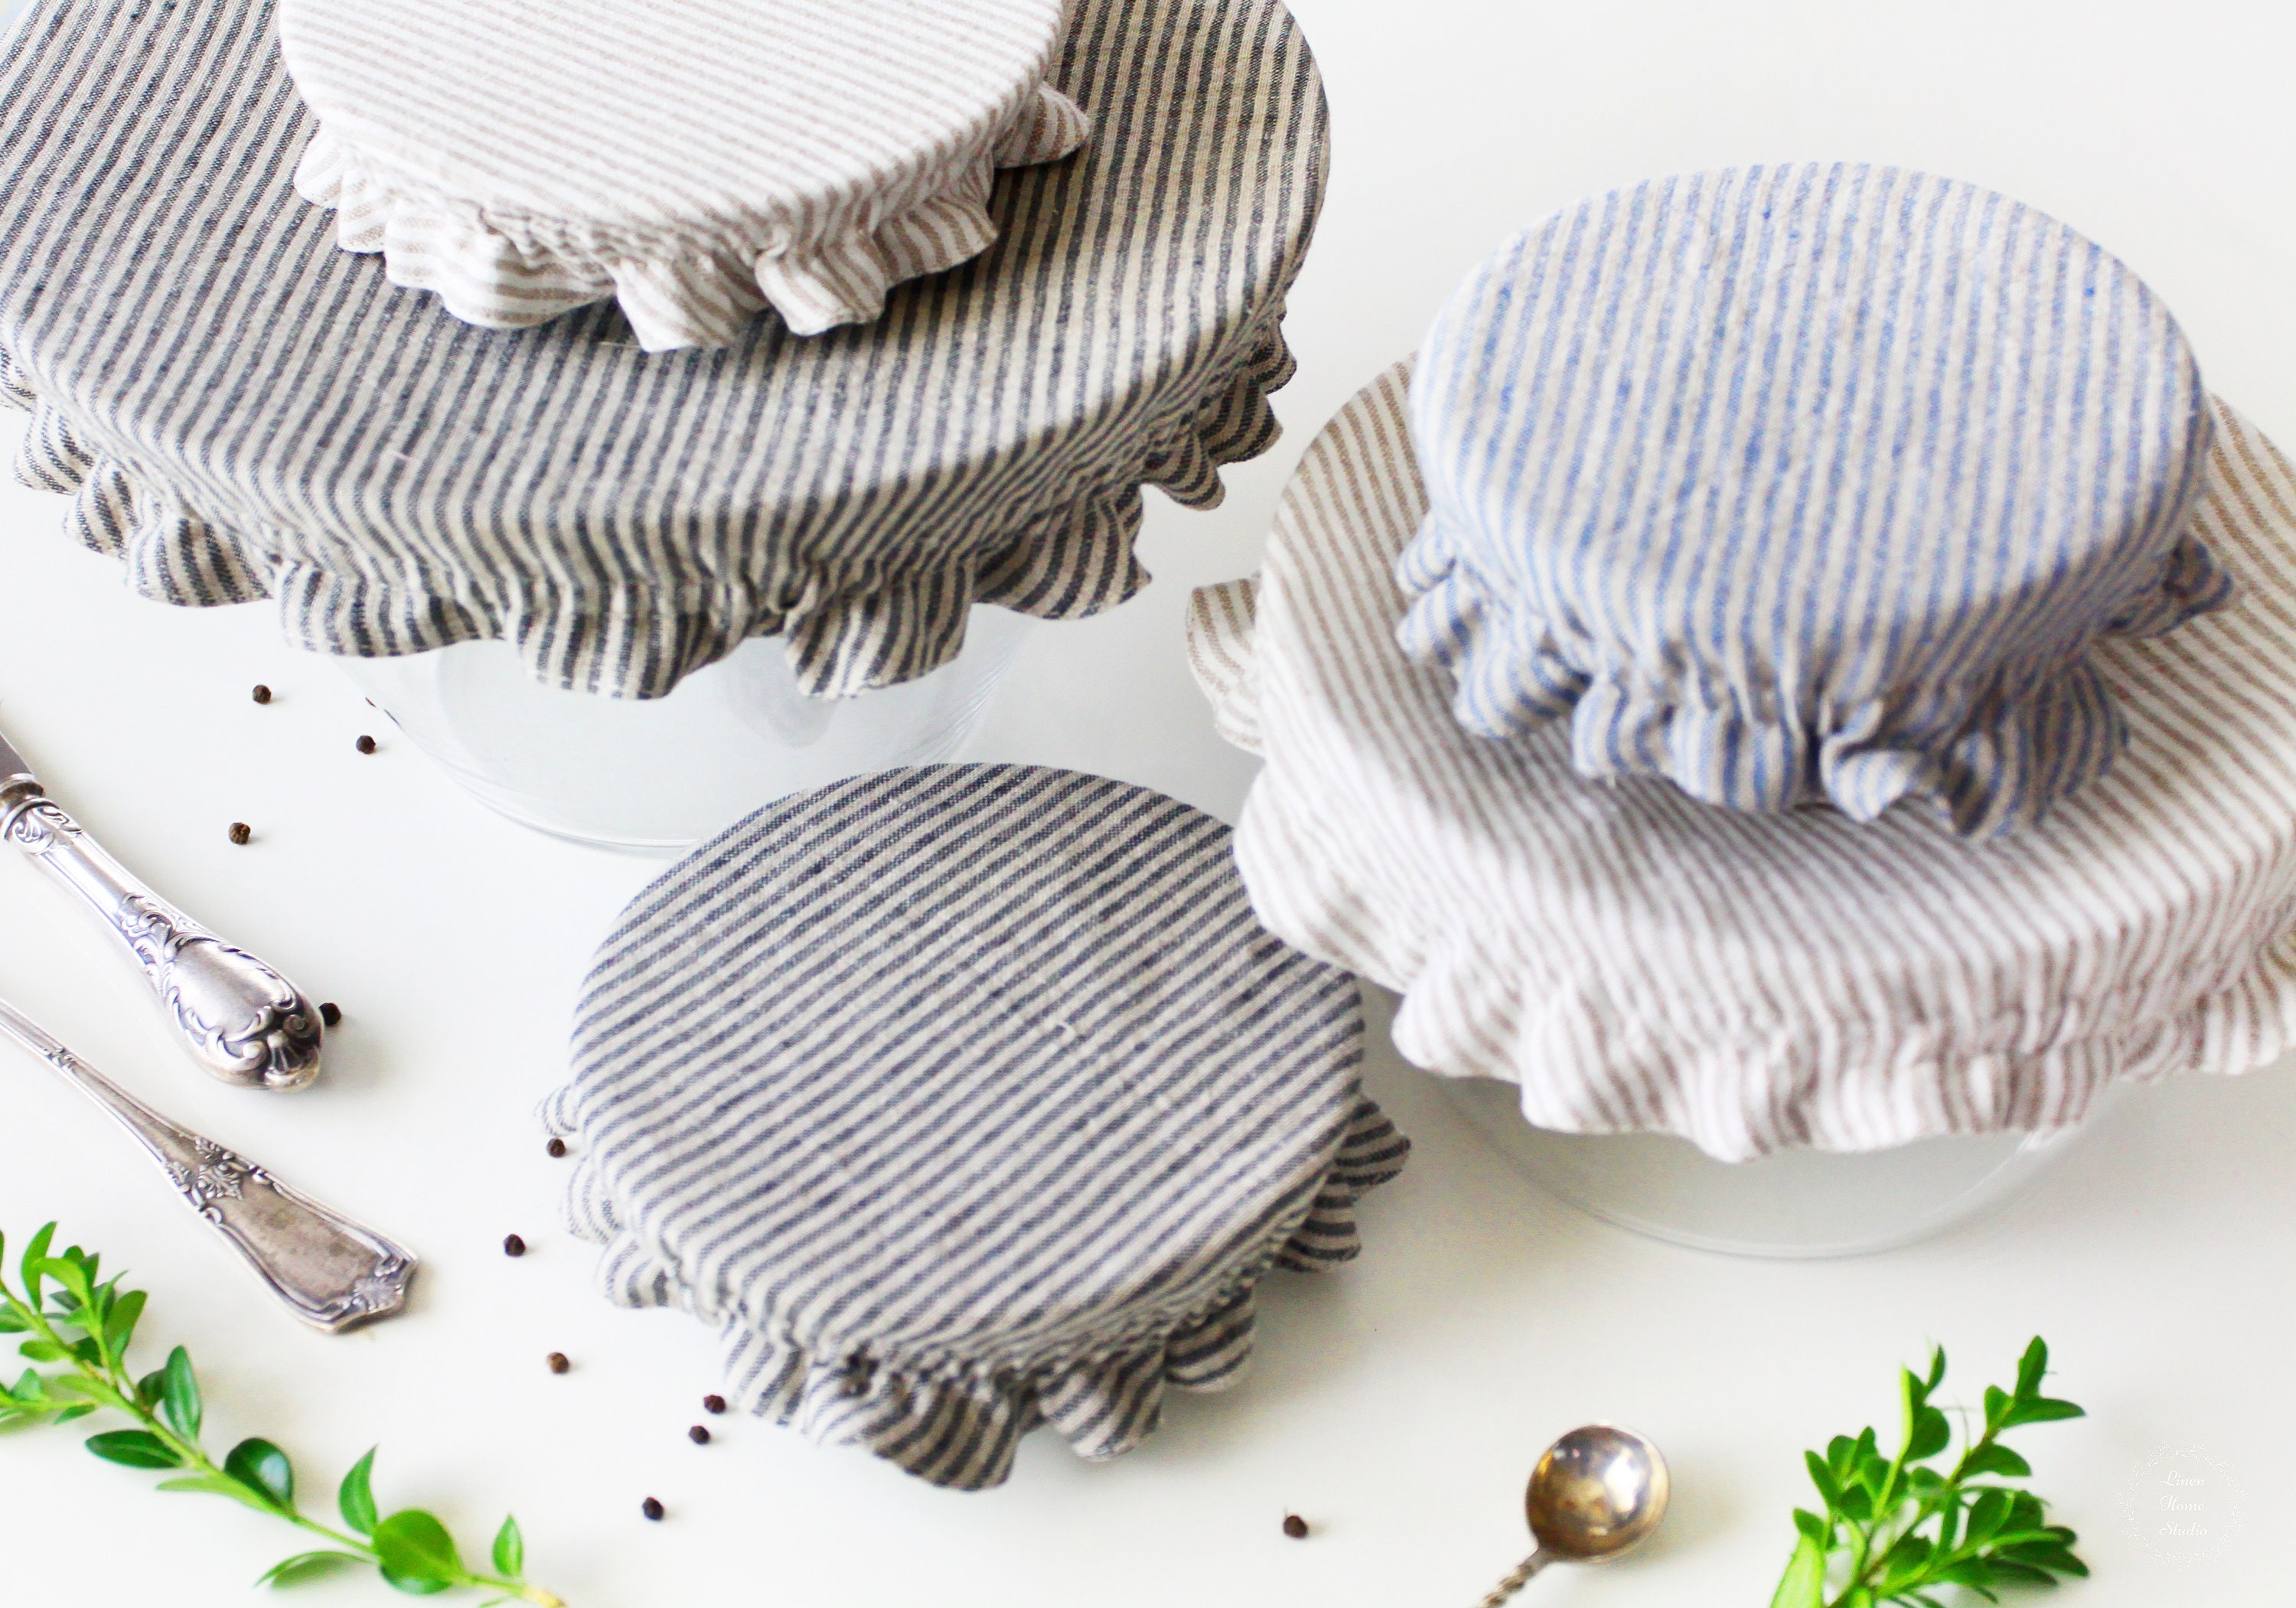 Reusable Fabric Bowl Covers, Set of 3 by Dot + Army